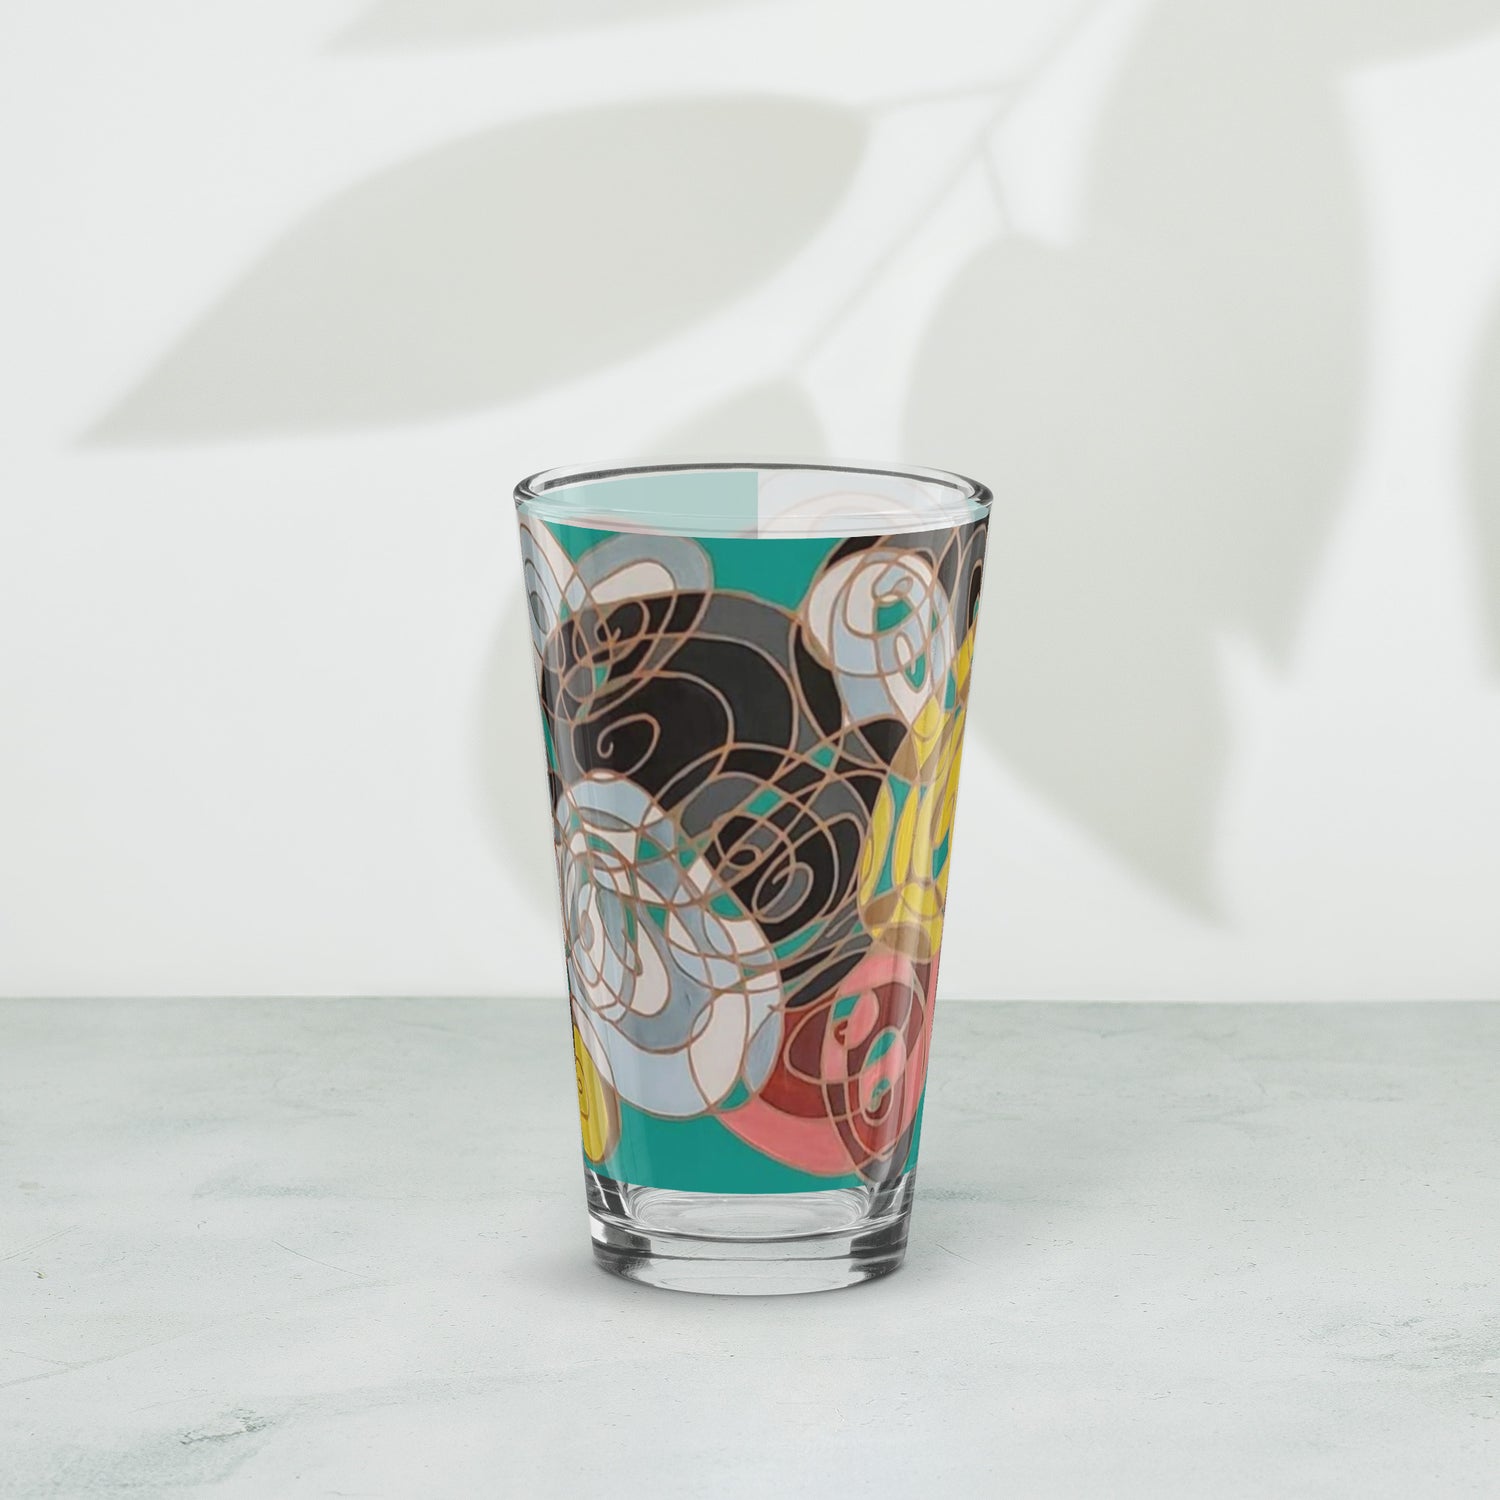 A drinking glass featuring abstract swirl art in red, yellow, black, white and teal.